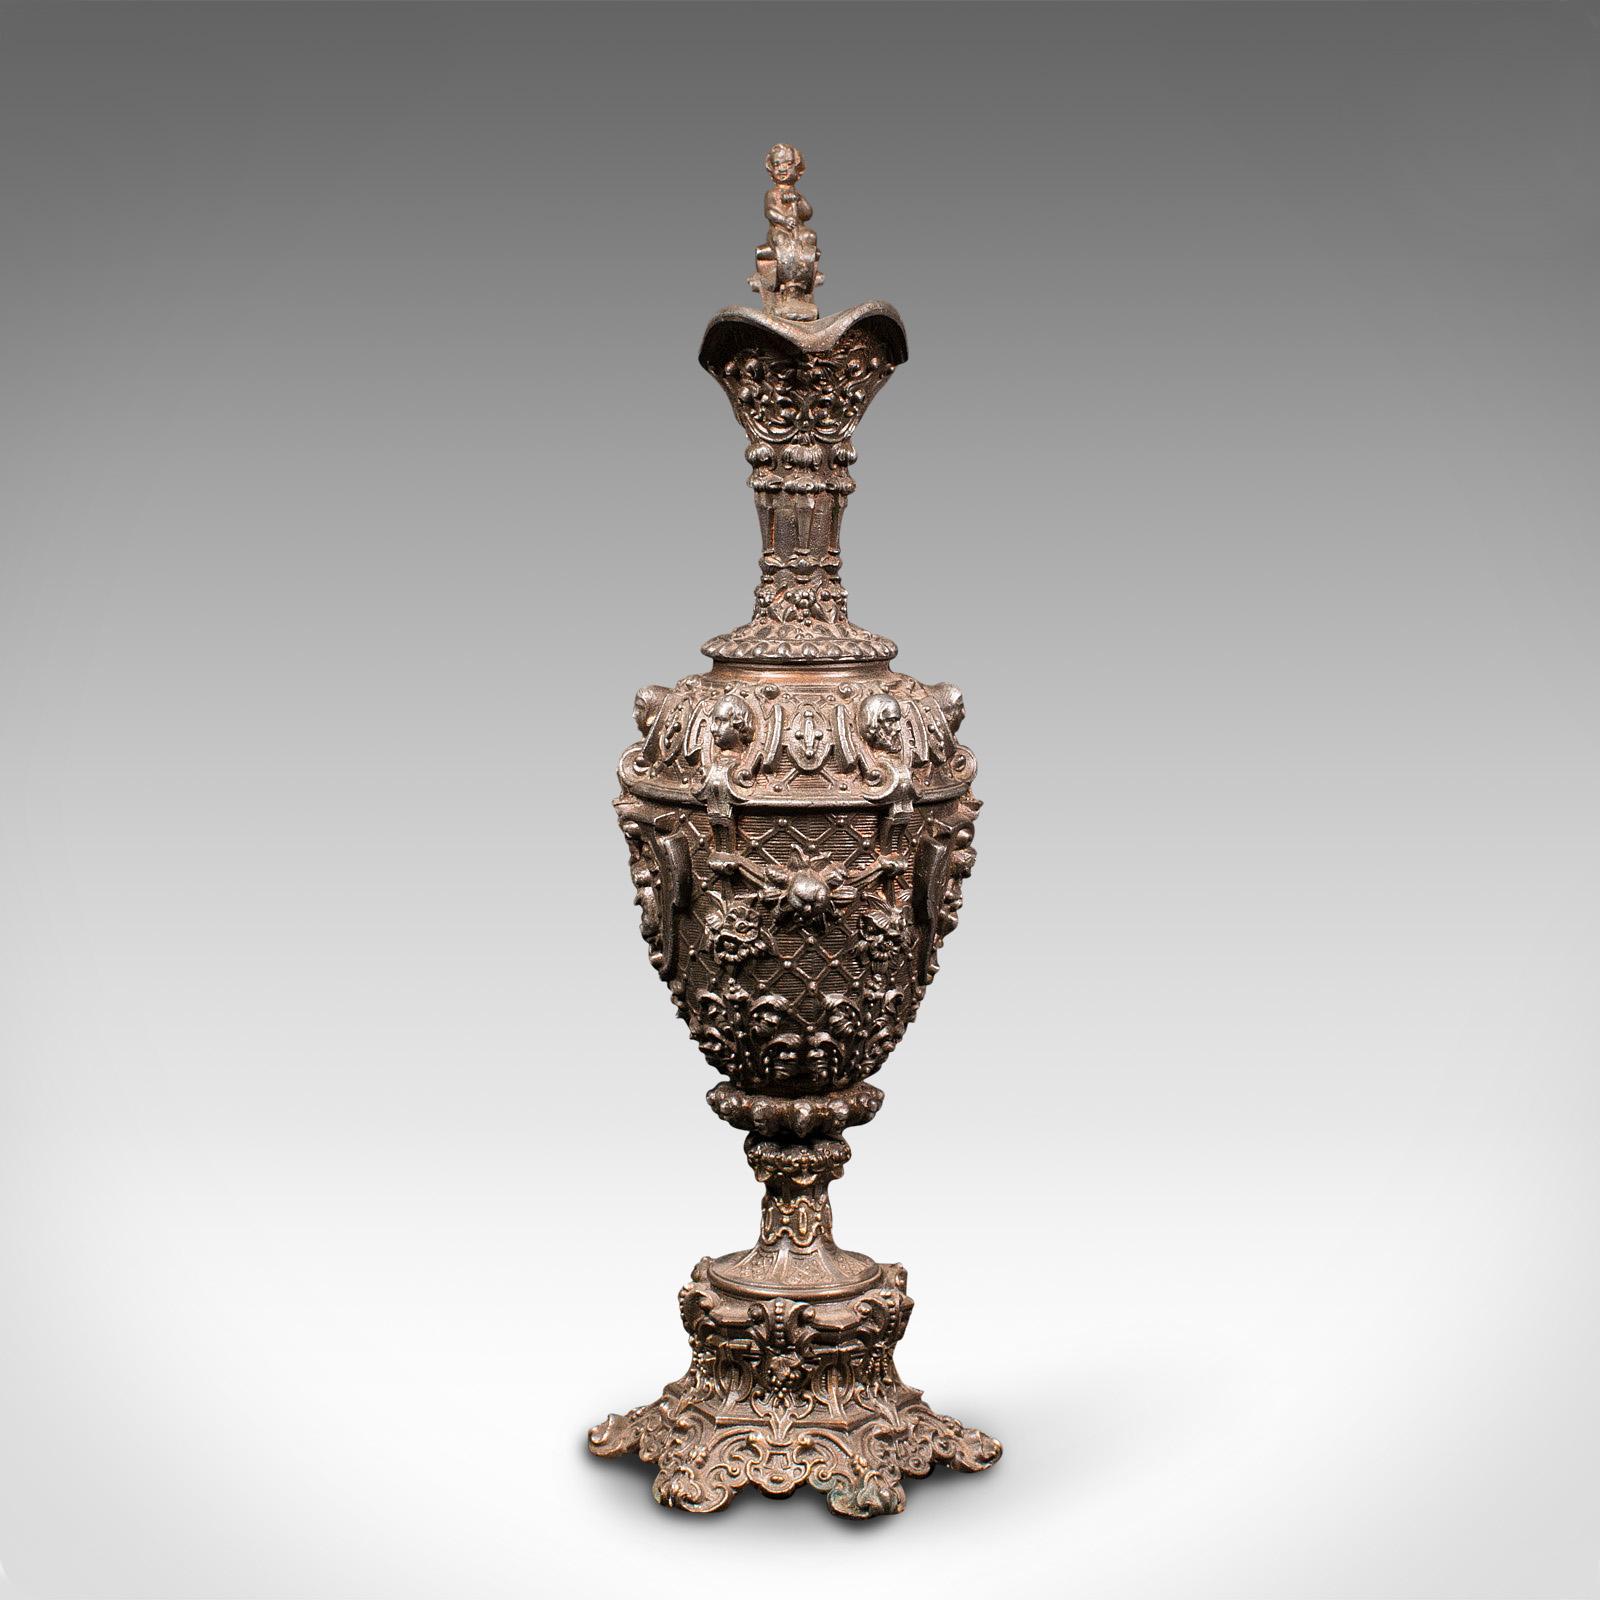 This is an antique candelabra. A French, bronze spelter candlestick in the form of a serving ewer, dating to the Victorian period, circa 1900.

Profusely decorative candelabra with great tonality
Displaying a desirably aged patina and in good